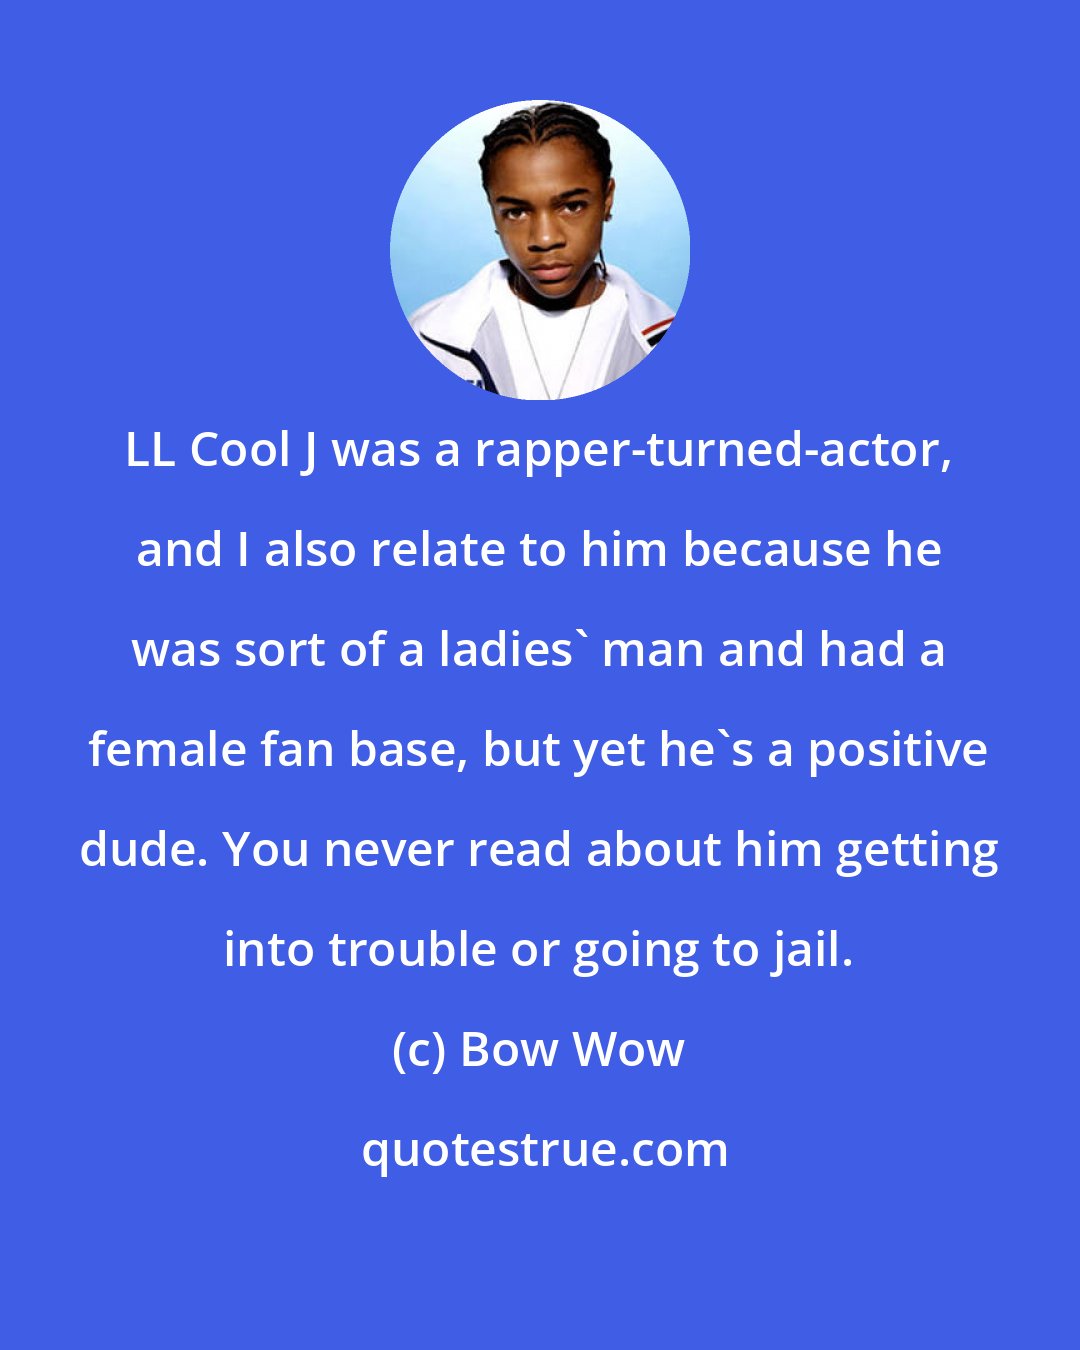 Bow Wow: LL Cool J was a rapper-turned-actor, and I also relate to him because he was sort of a ladies' man and had a female fan base, but yet he's a positive dude. You never read about him getting into trouble or going to jail.